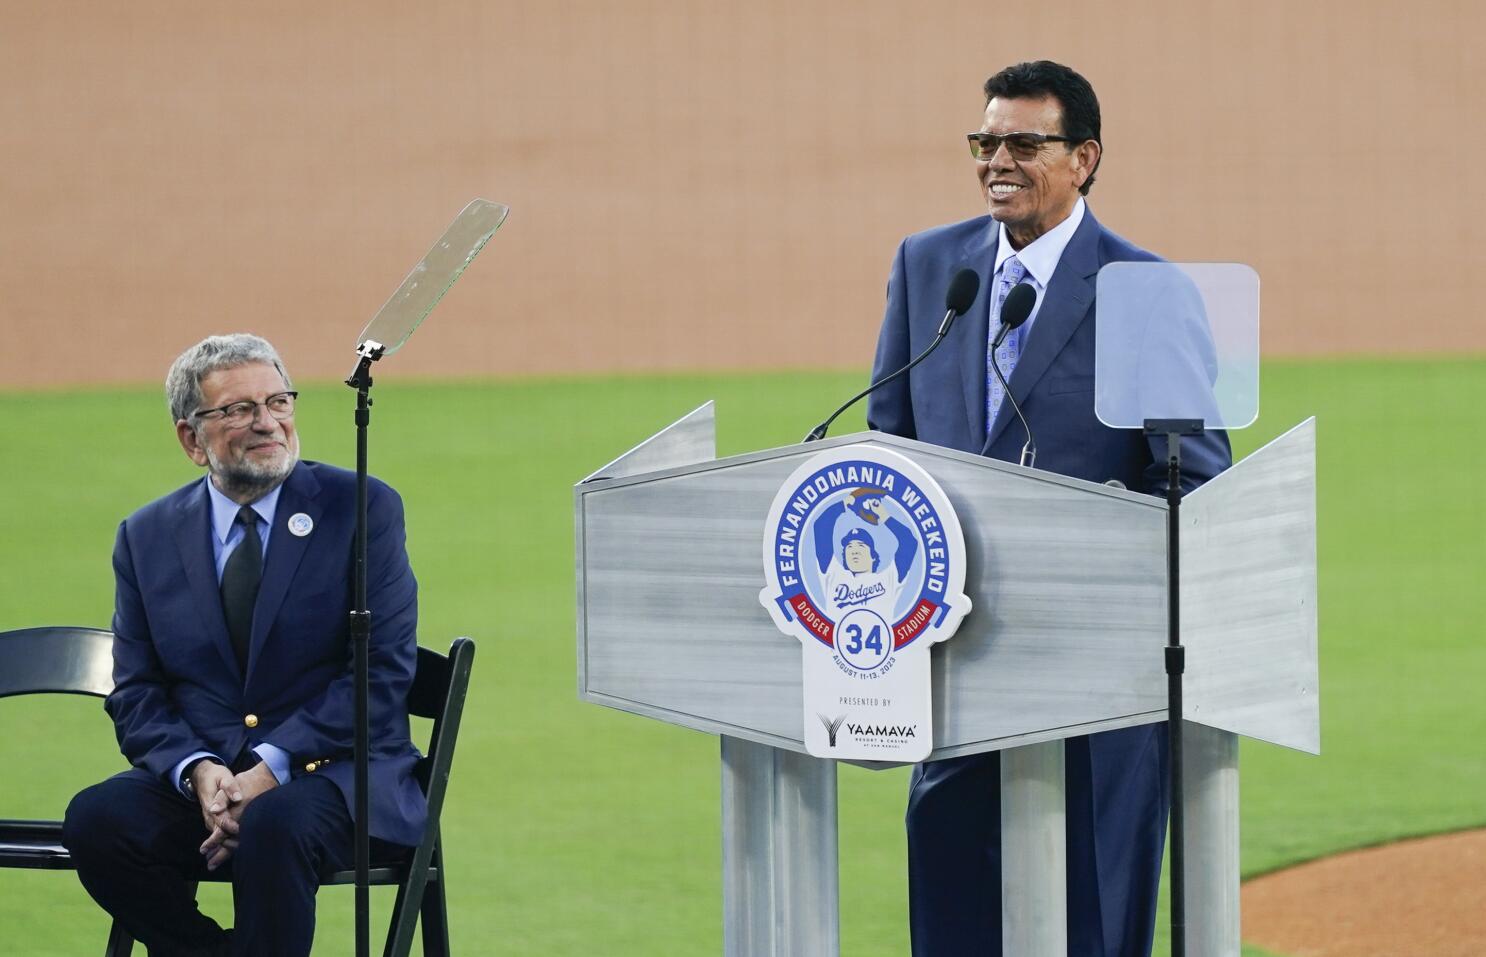 Fernando Valenzuela Finally Gets a Much Overdue Honor from the Dodgers, Why  Did it Take So Long?